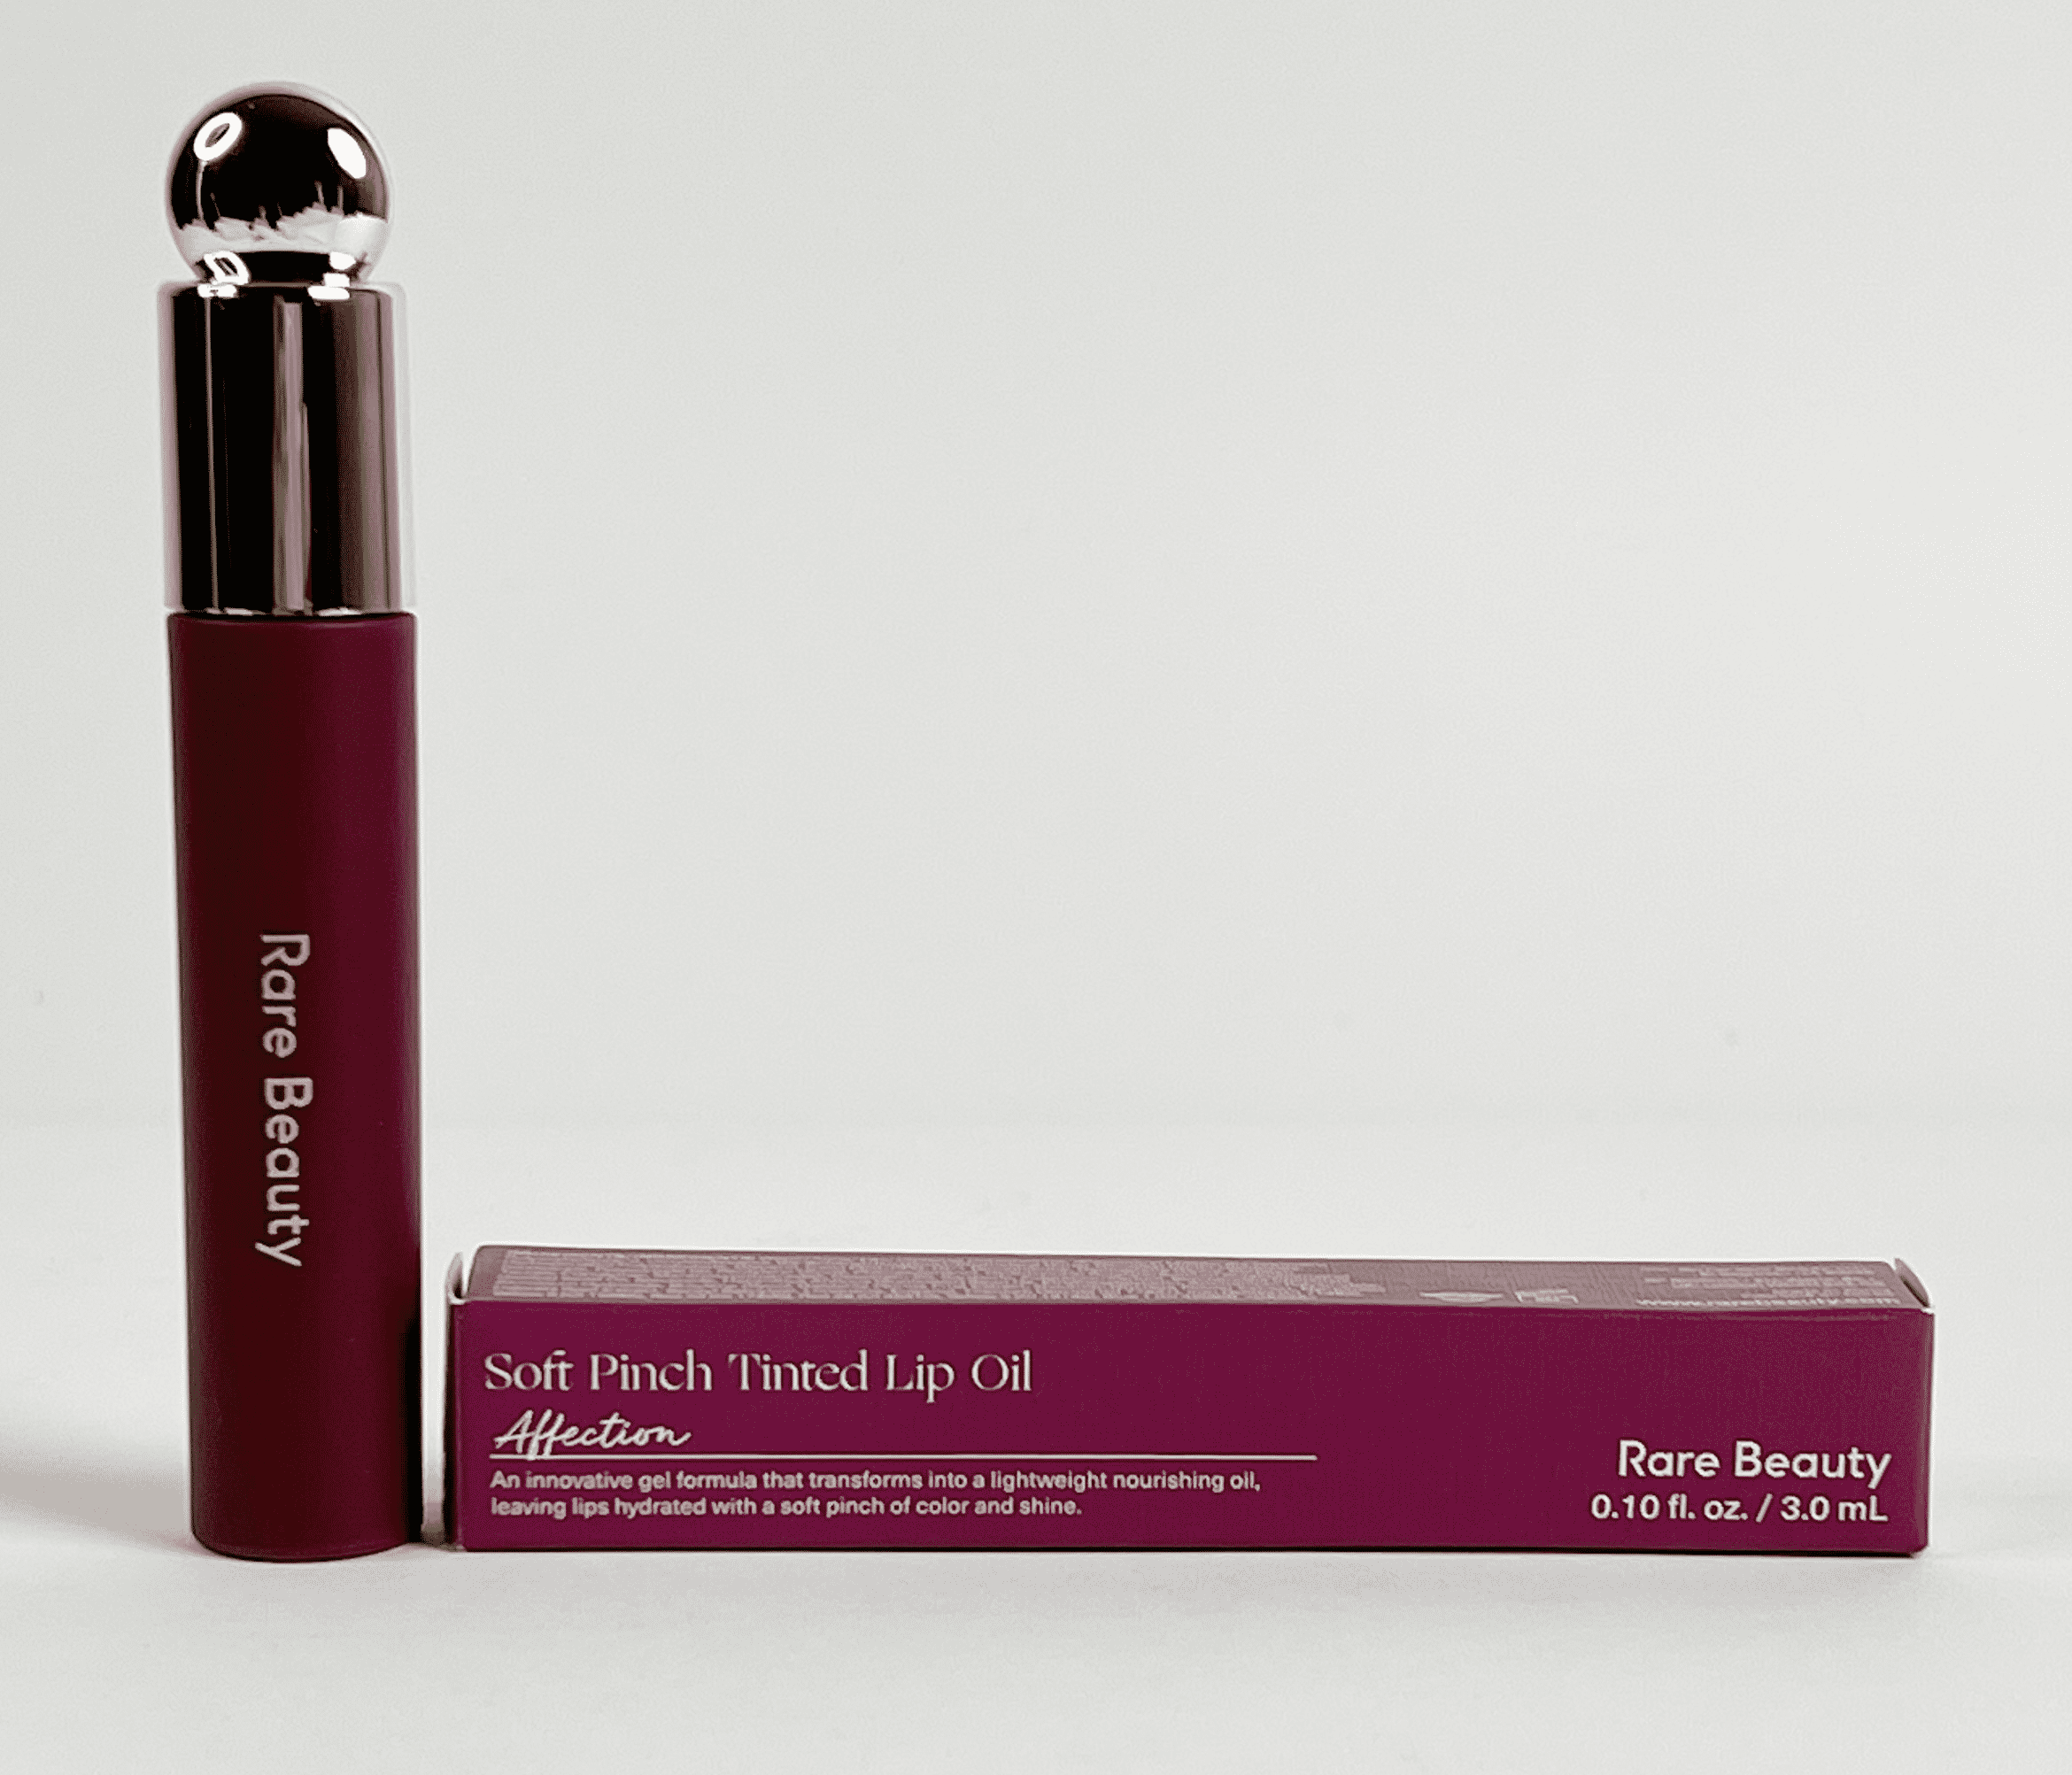 Rare Beauty by Selena Gomez Soft Pinch Tinted Lip Oil - Affection 